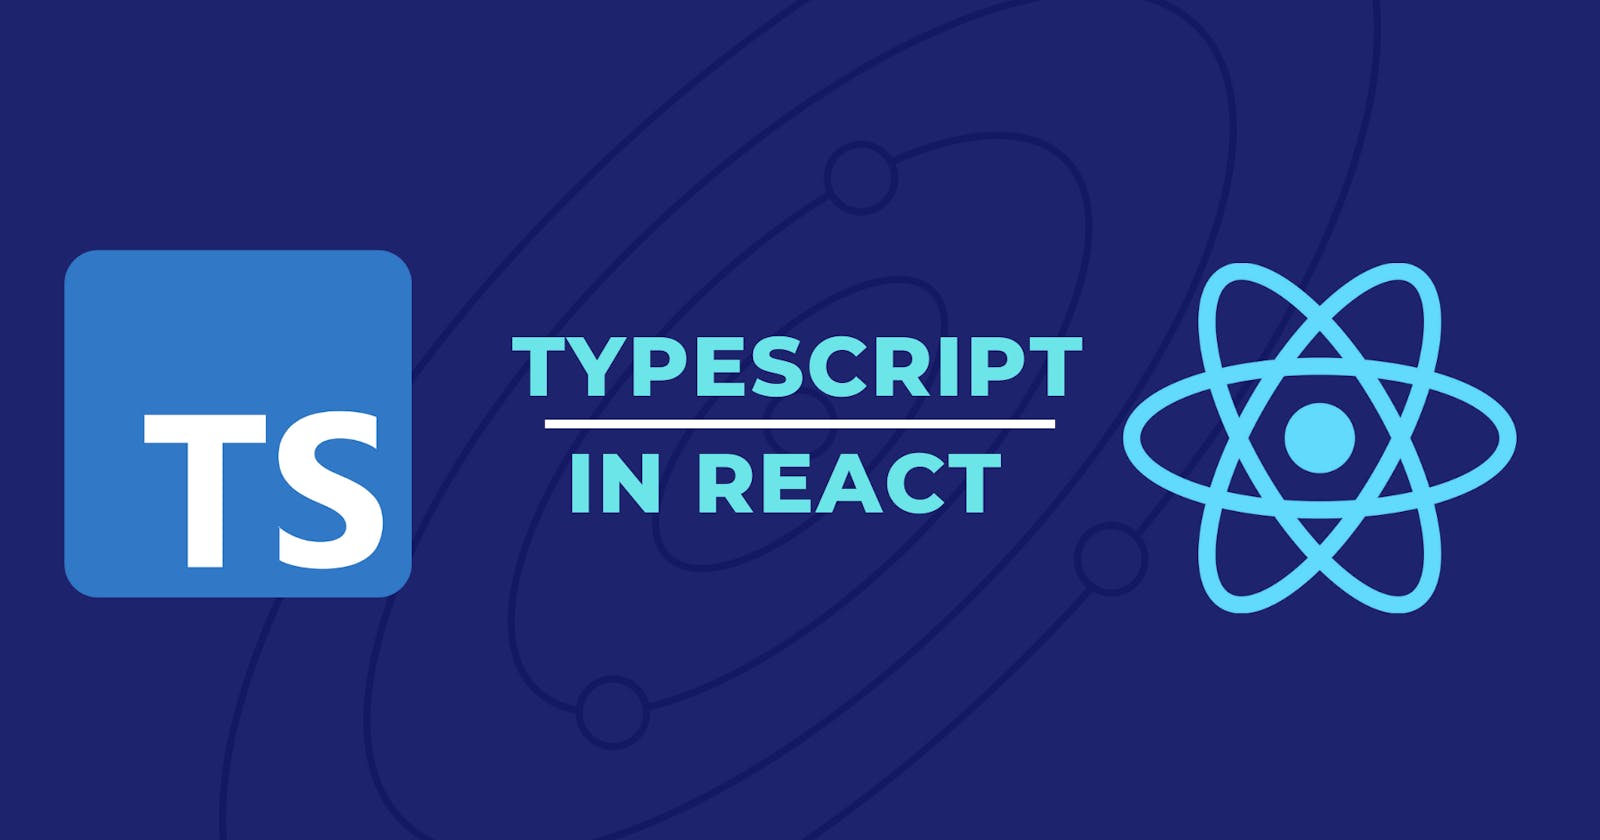 Introduction to Typescript for React developers